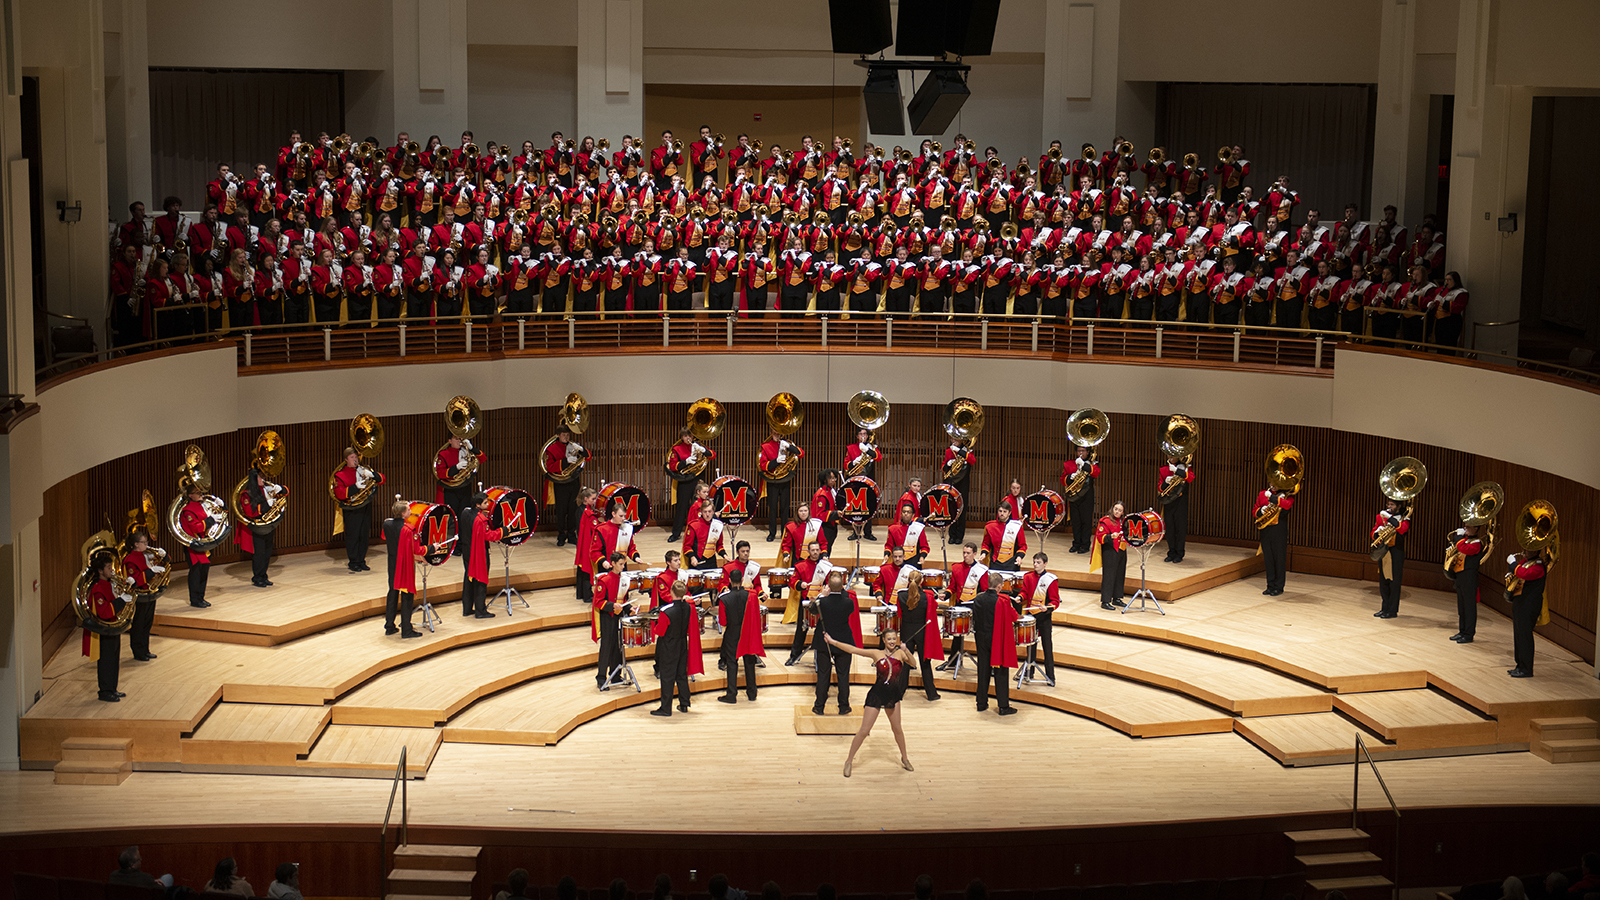 The Mighty Sound of Maryland Marching Band performs in Dekelboum Concert Hall.